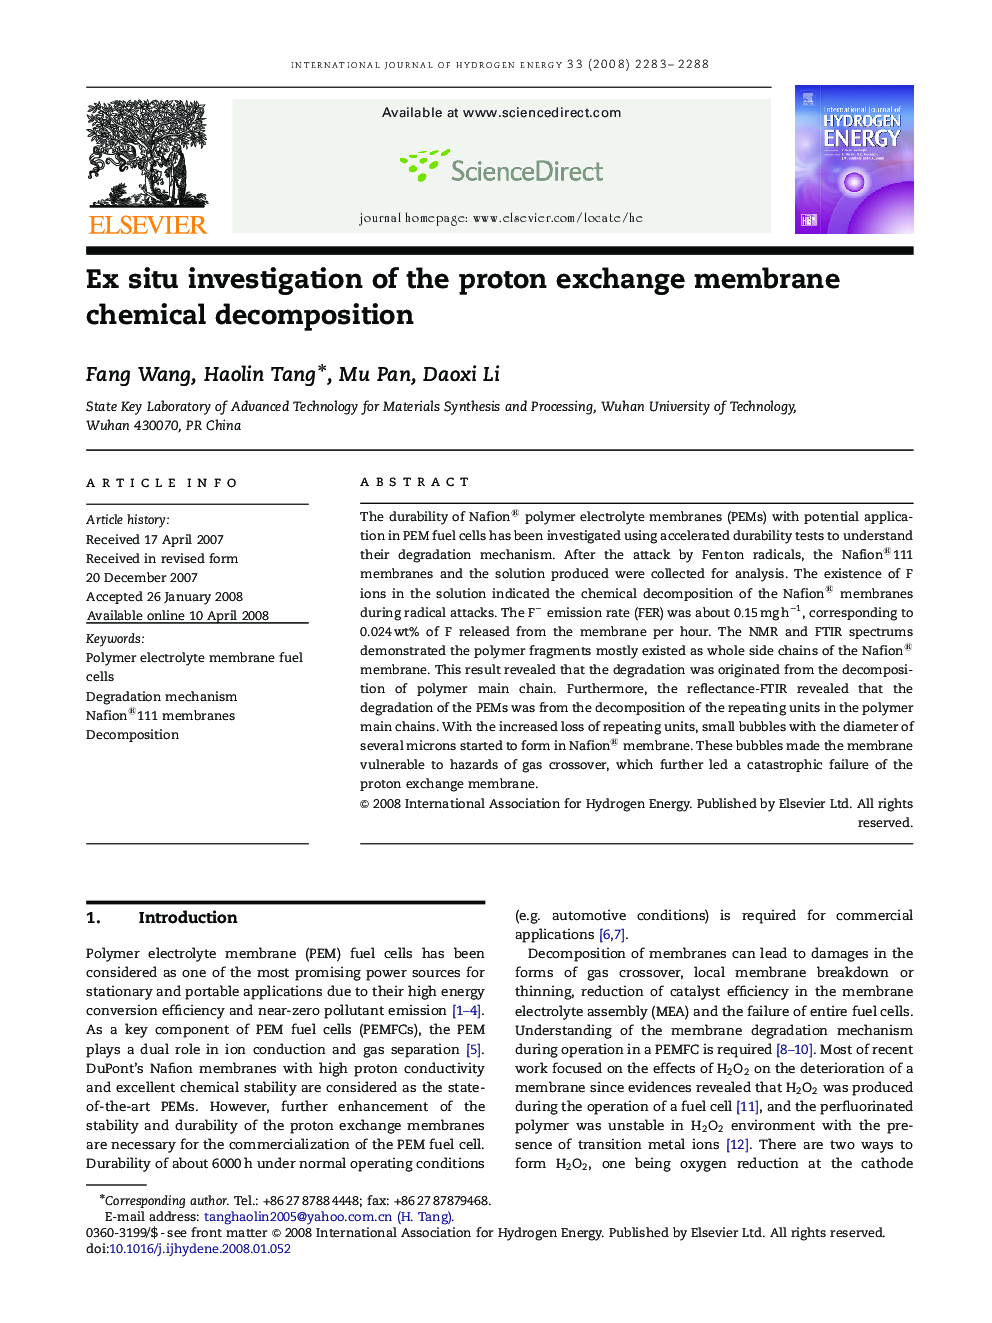 Ex situ investigation of the proton exchange membrane chemical decomposition